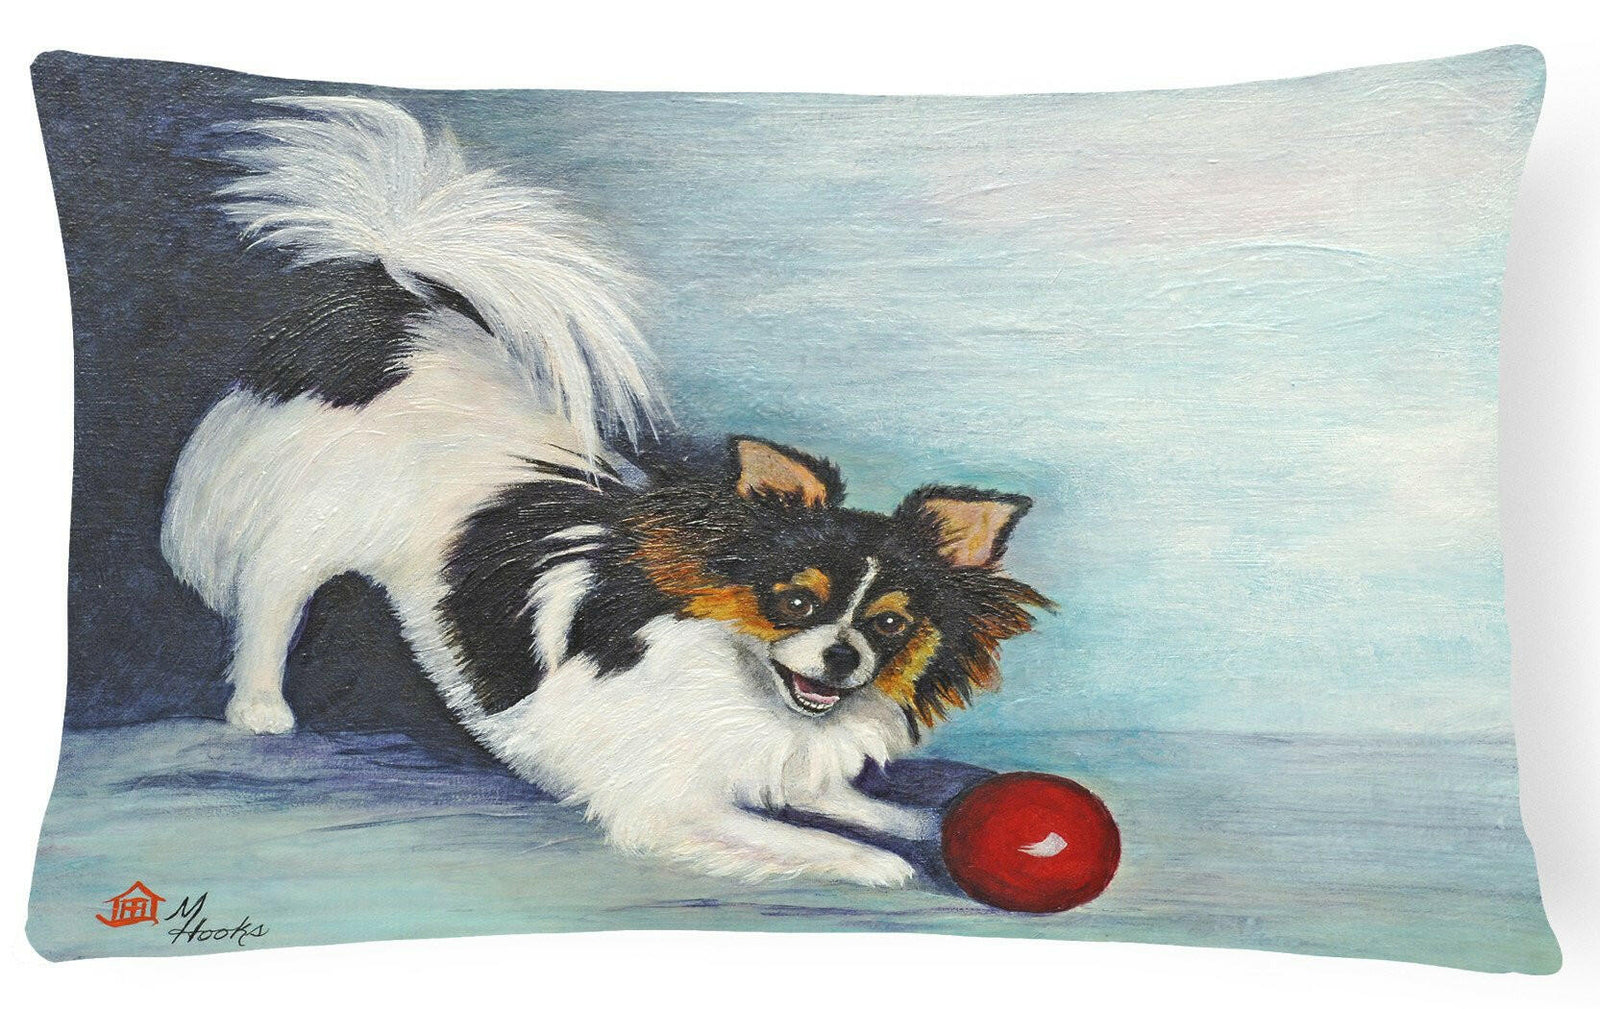 Chihuahua Play Ball Fabric Decorative Pillow MH1054PW1216 by Caroline's Treasures